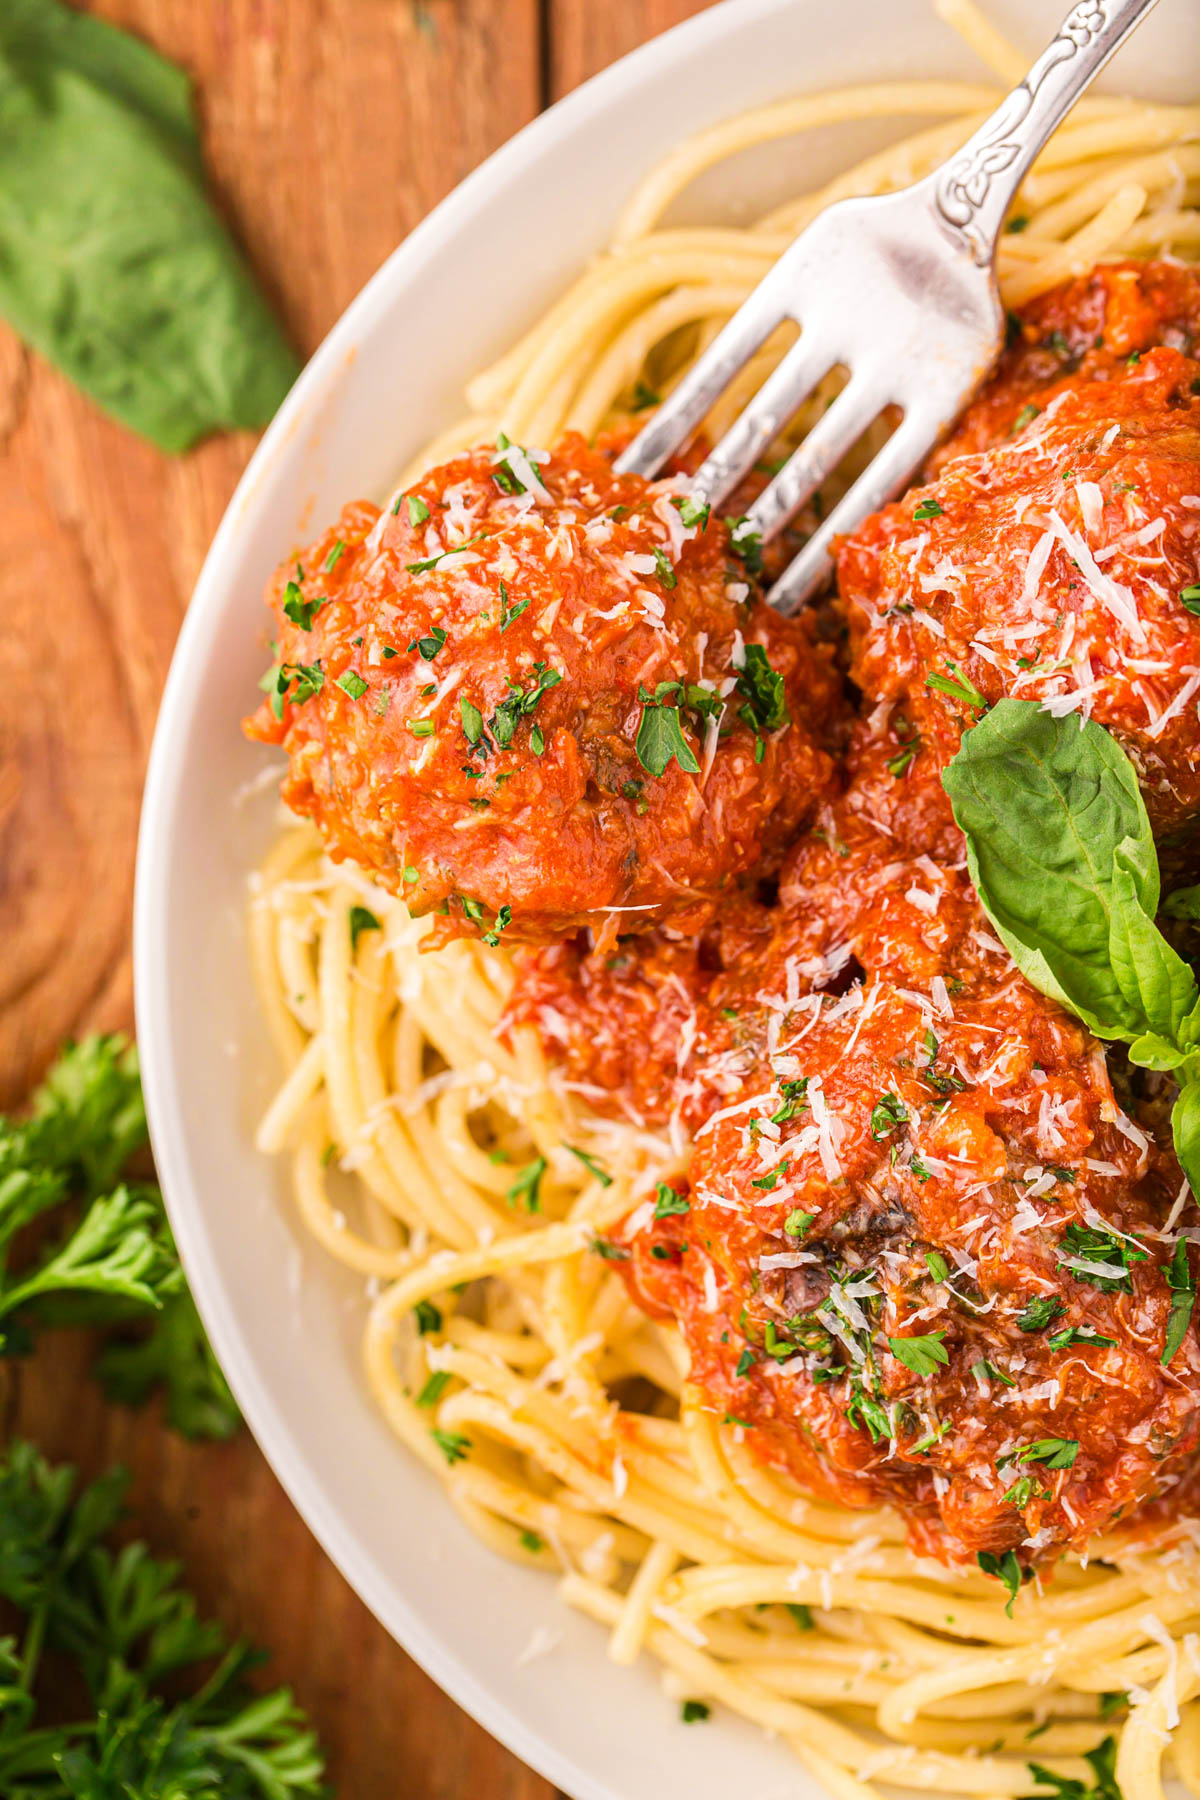 A fork piercing a meatballs on a plate of spaghetti.